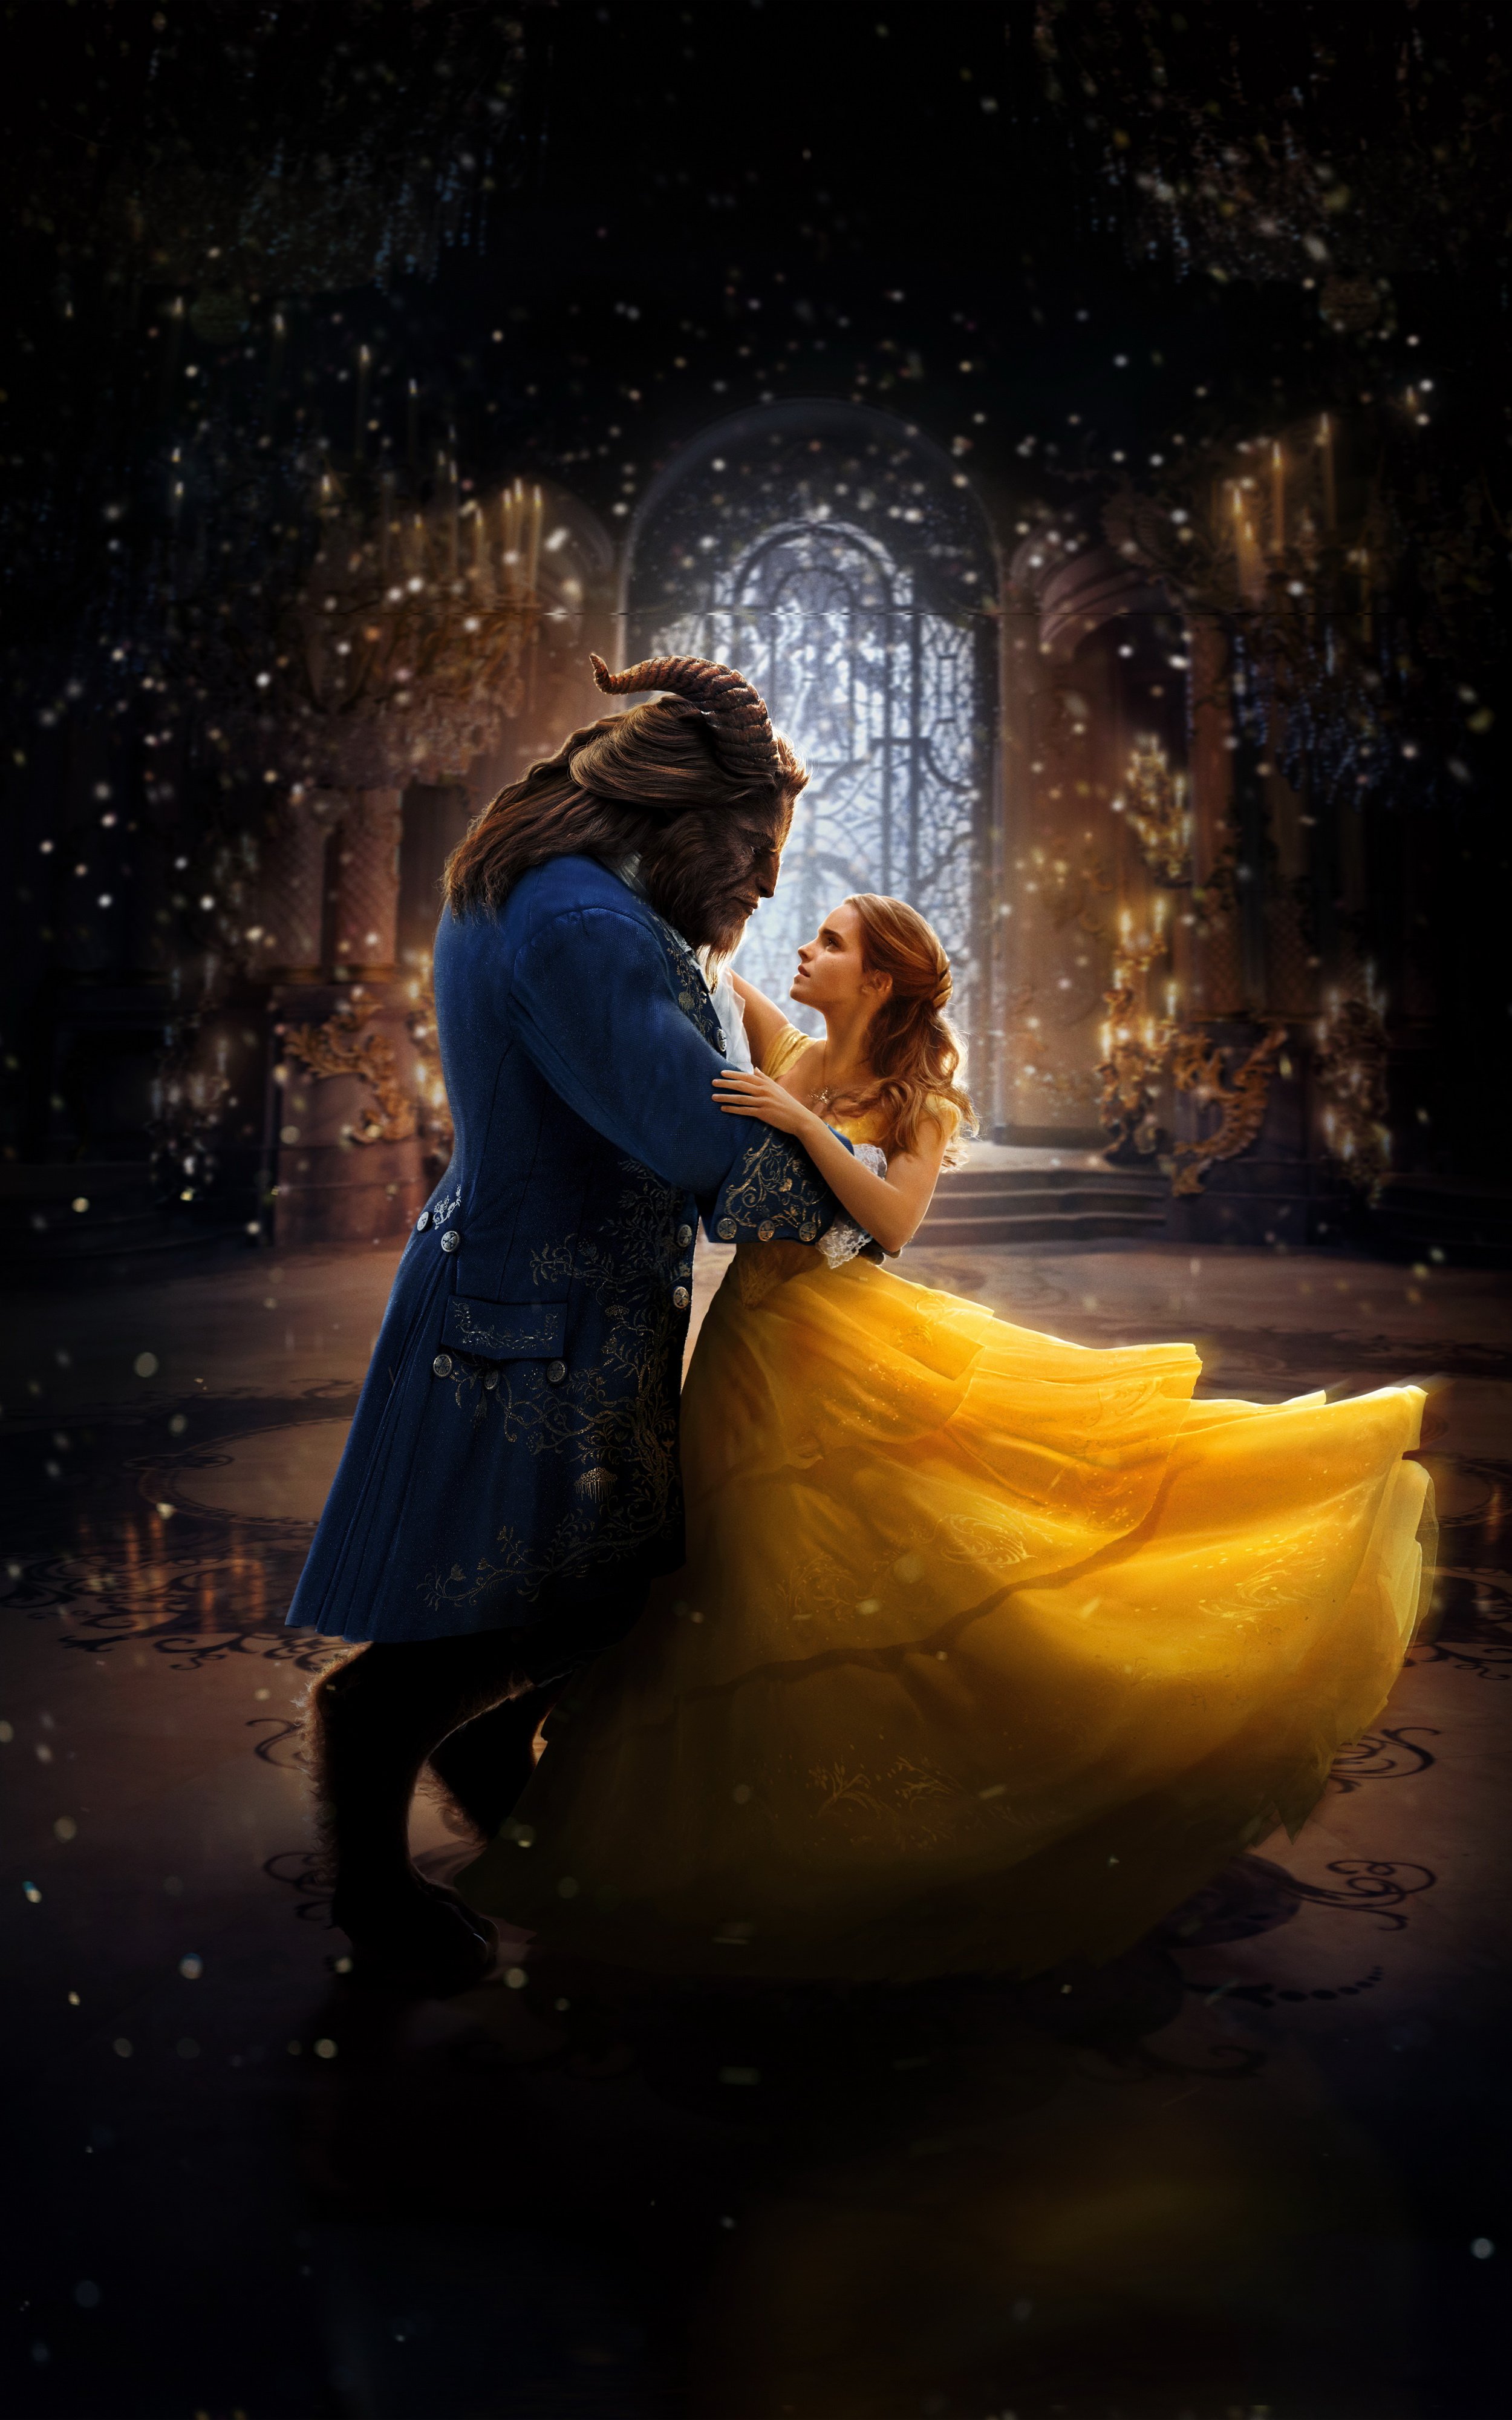 Detail Beauty And The Beast Wallpaper Nomer 2